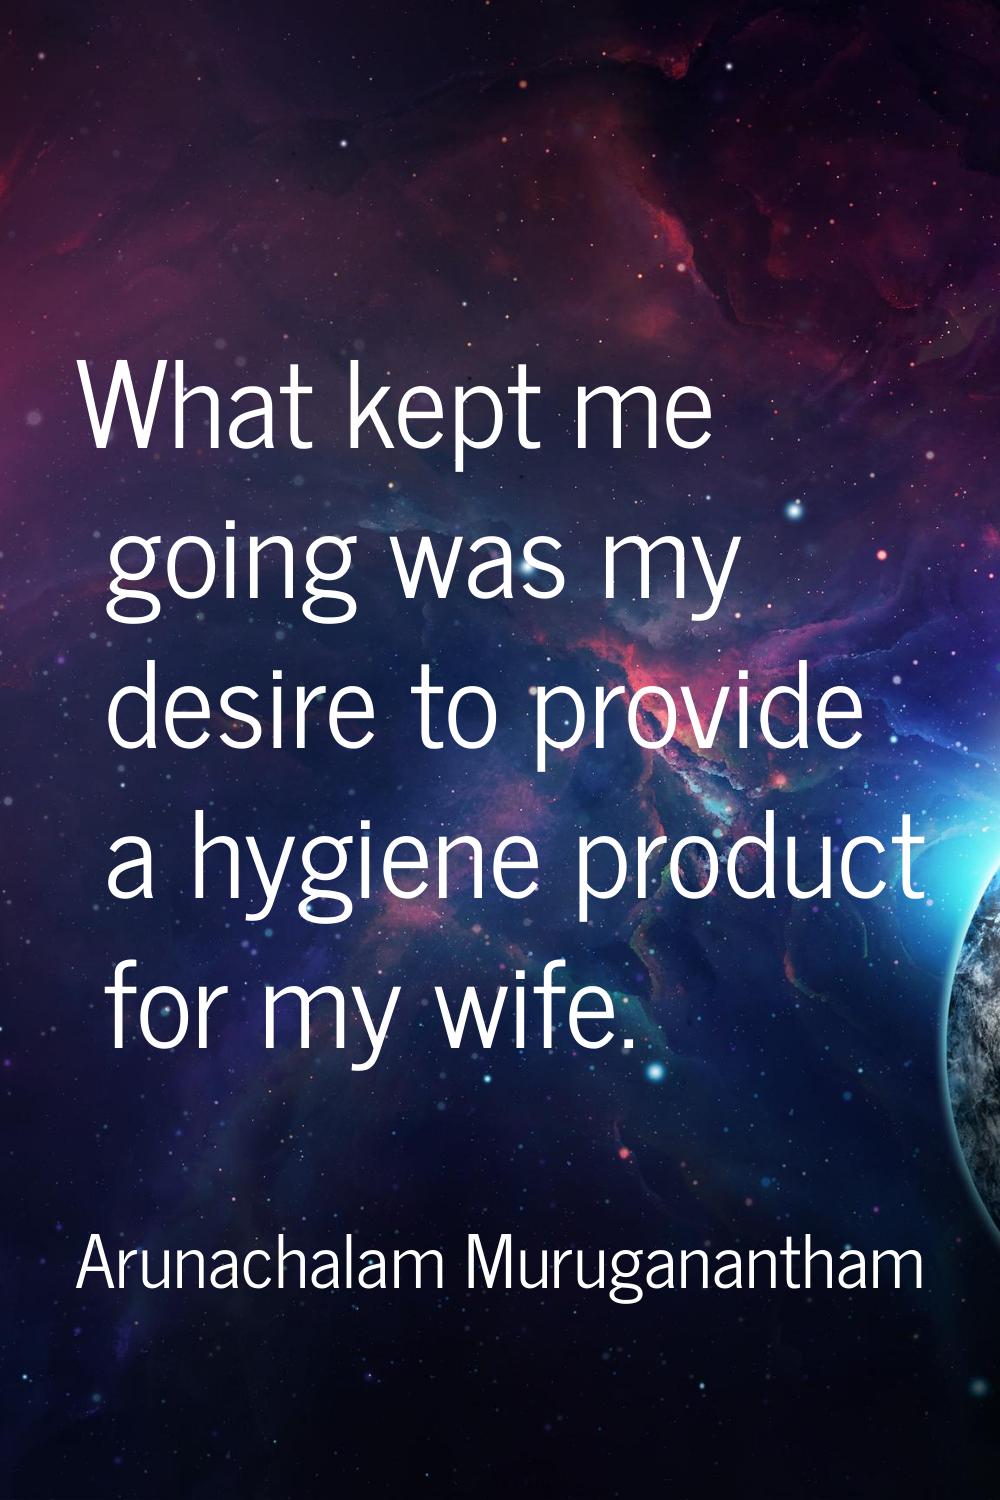 What kept me going was my desire to provide a hygiene product for my wife.